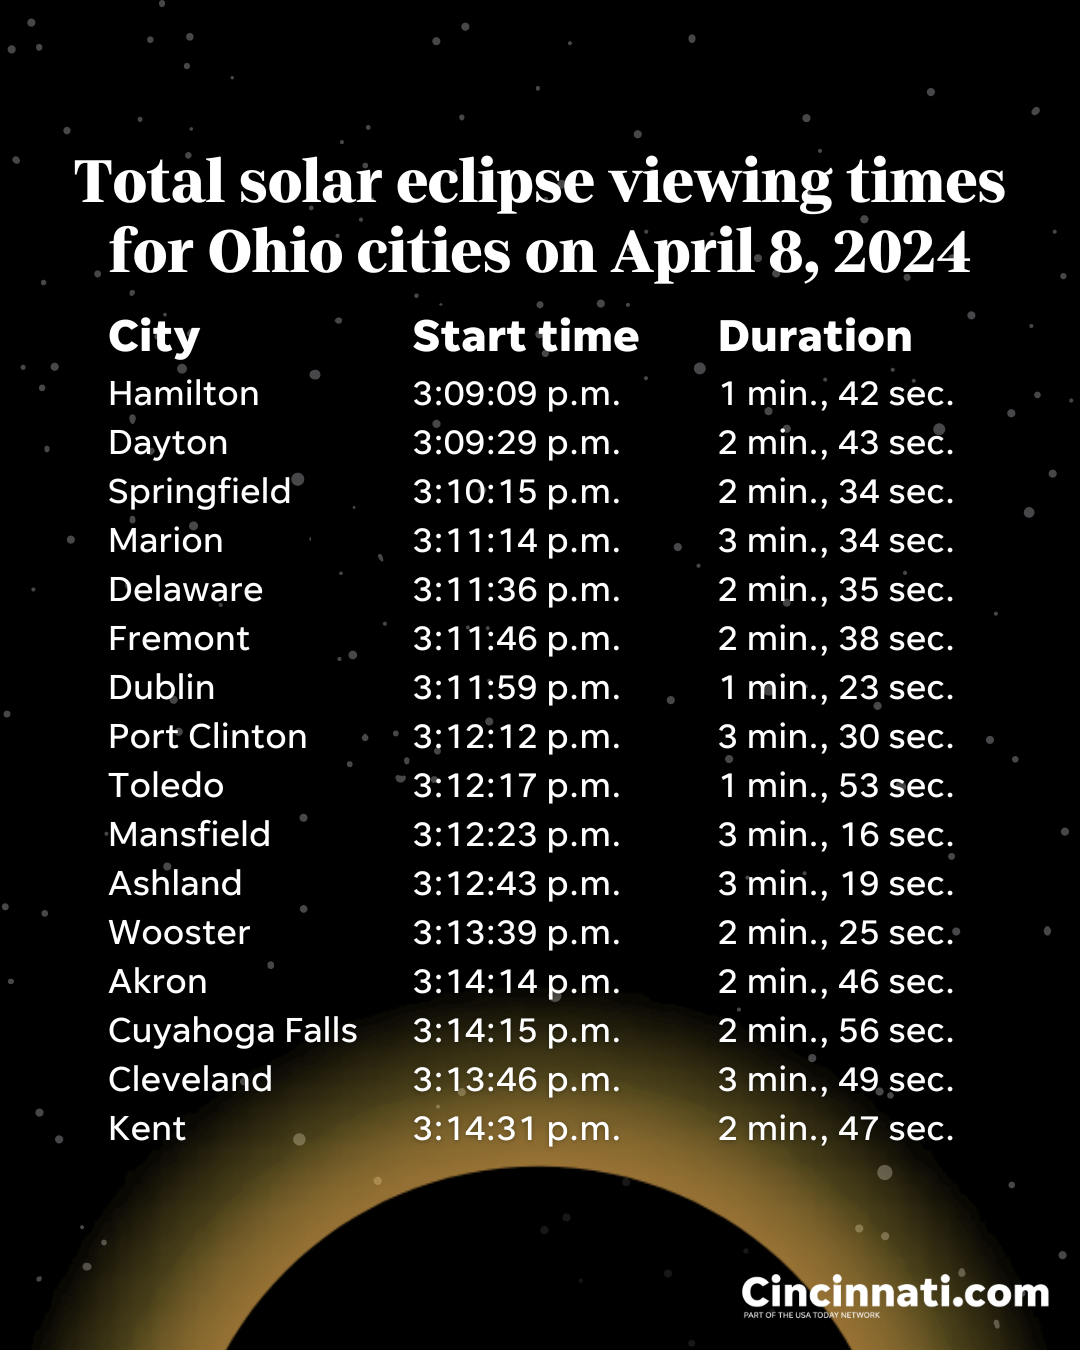 Where to watch the 2024 eclipse Solar eclipseviewing events in